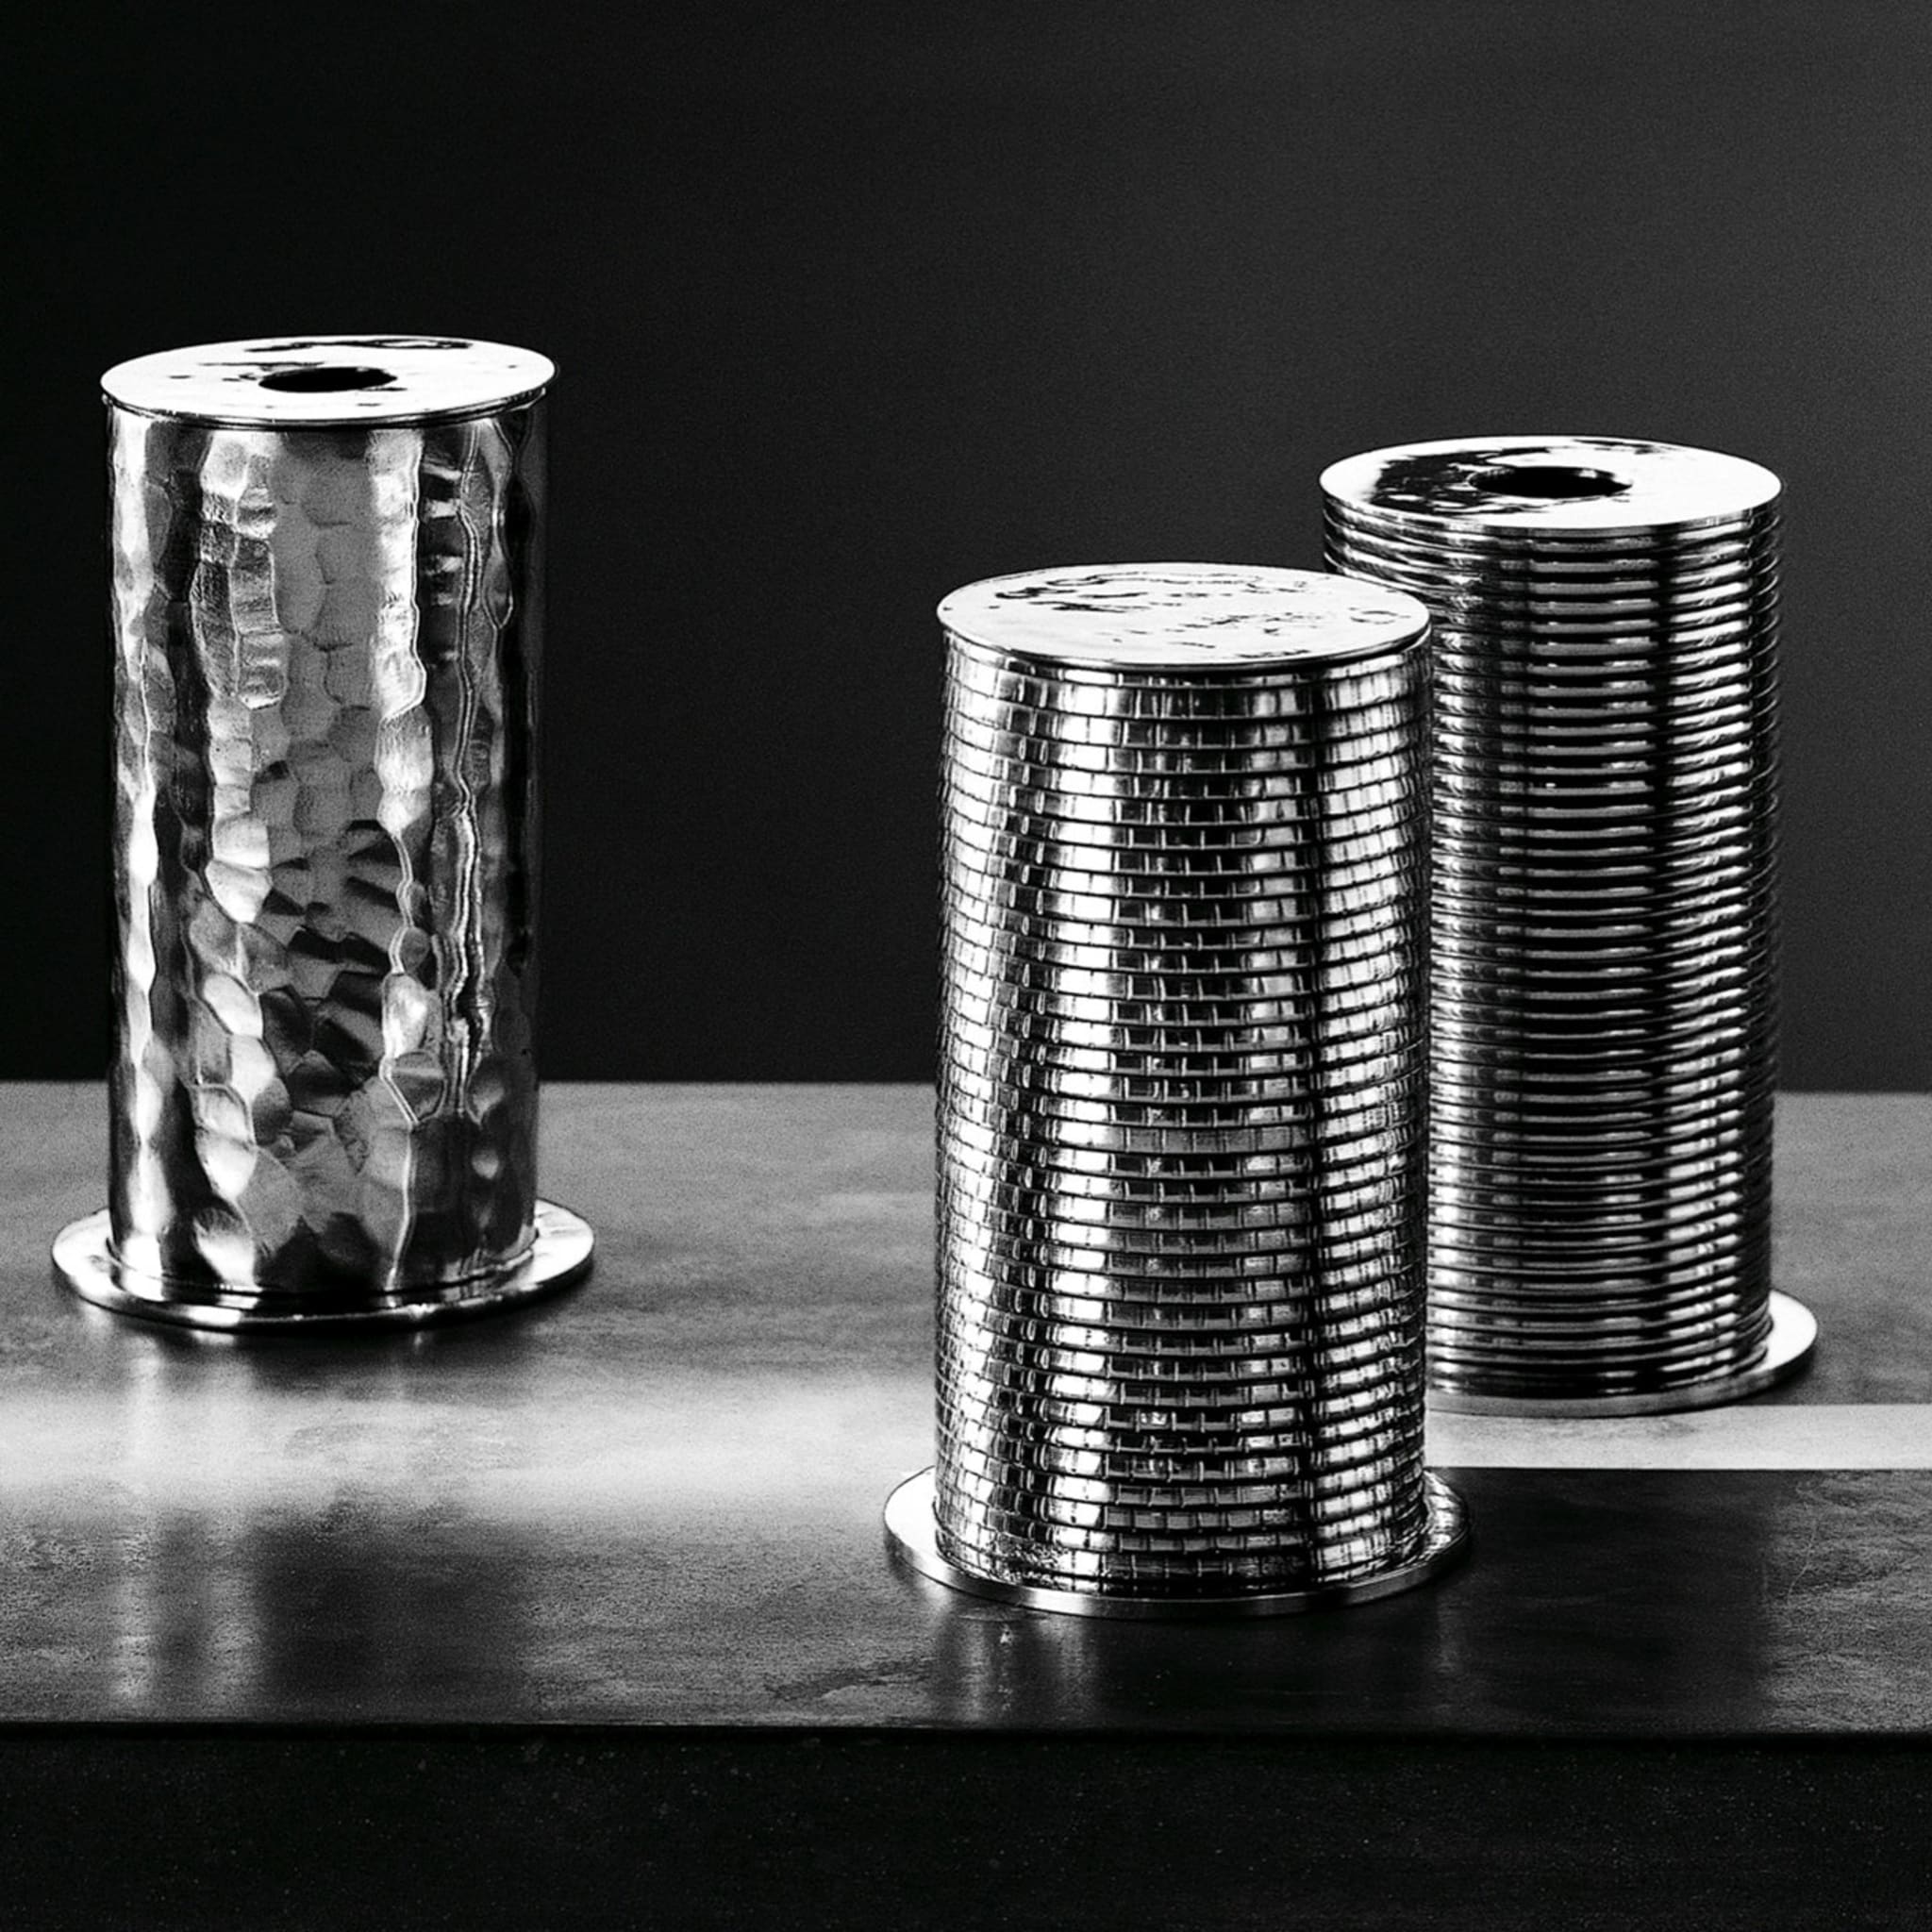 Lucilio Limited Edition Jar by Marco Susani and Mario Trimarchi - Alternative view 1